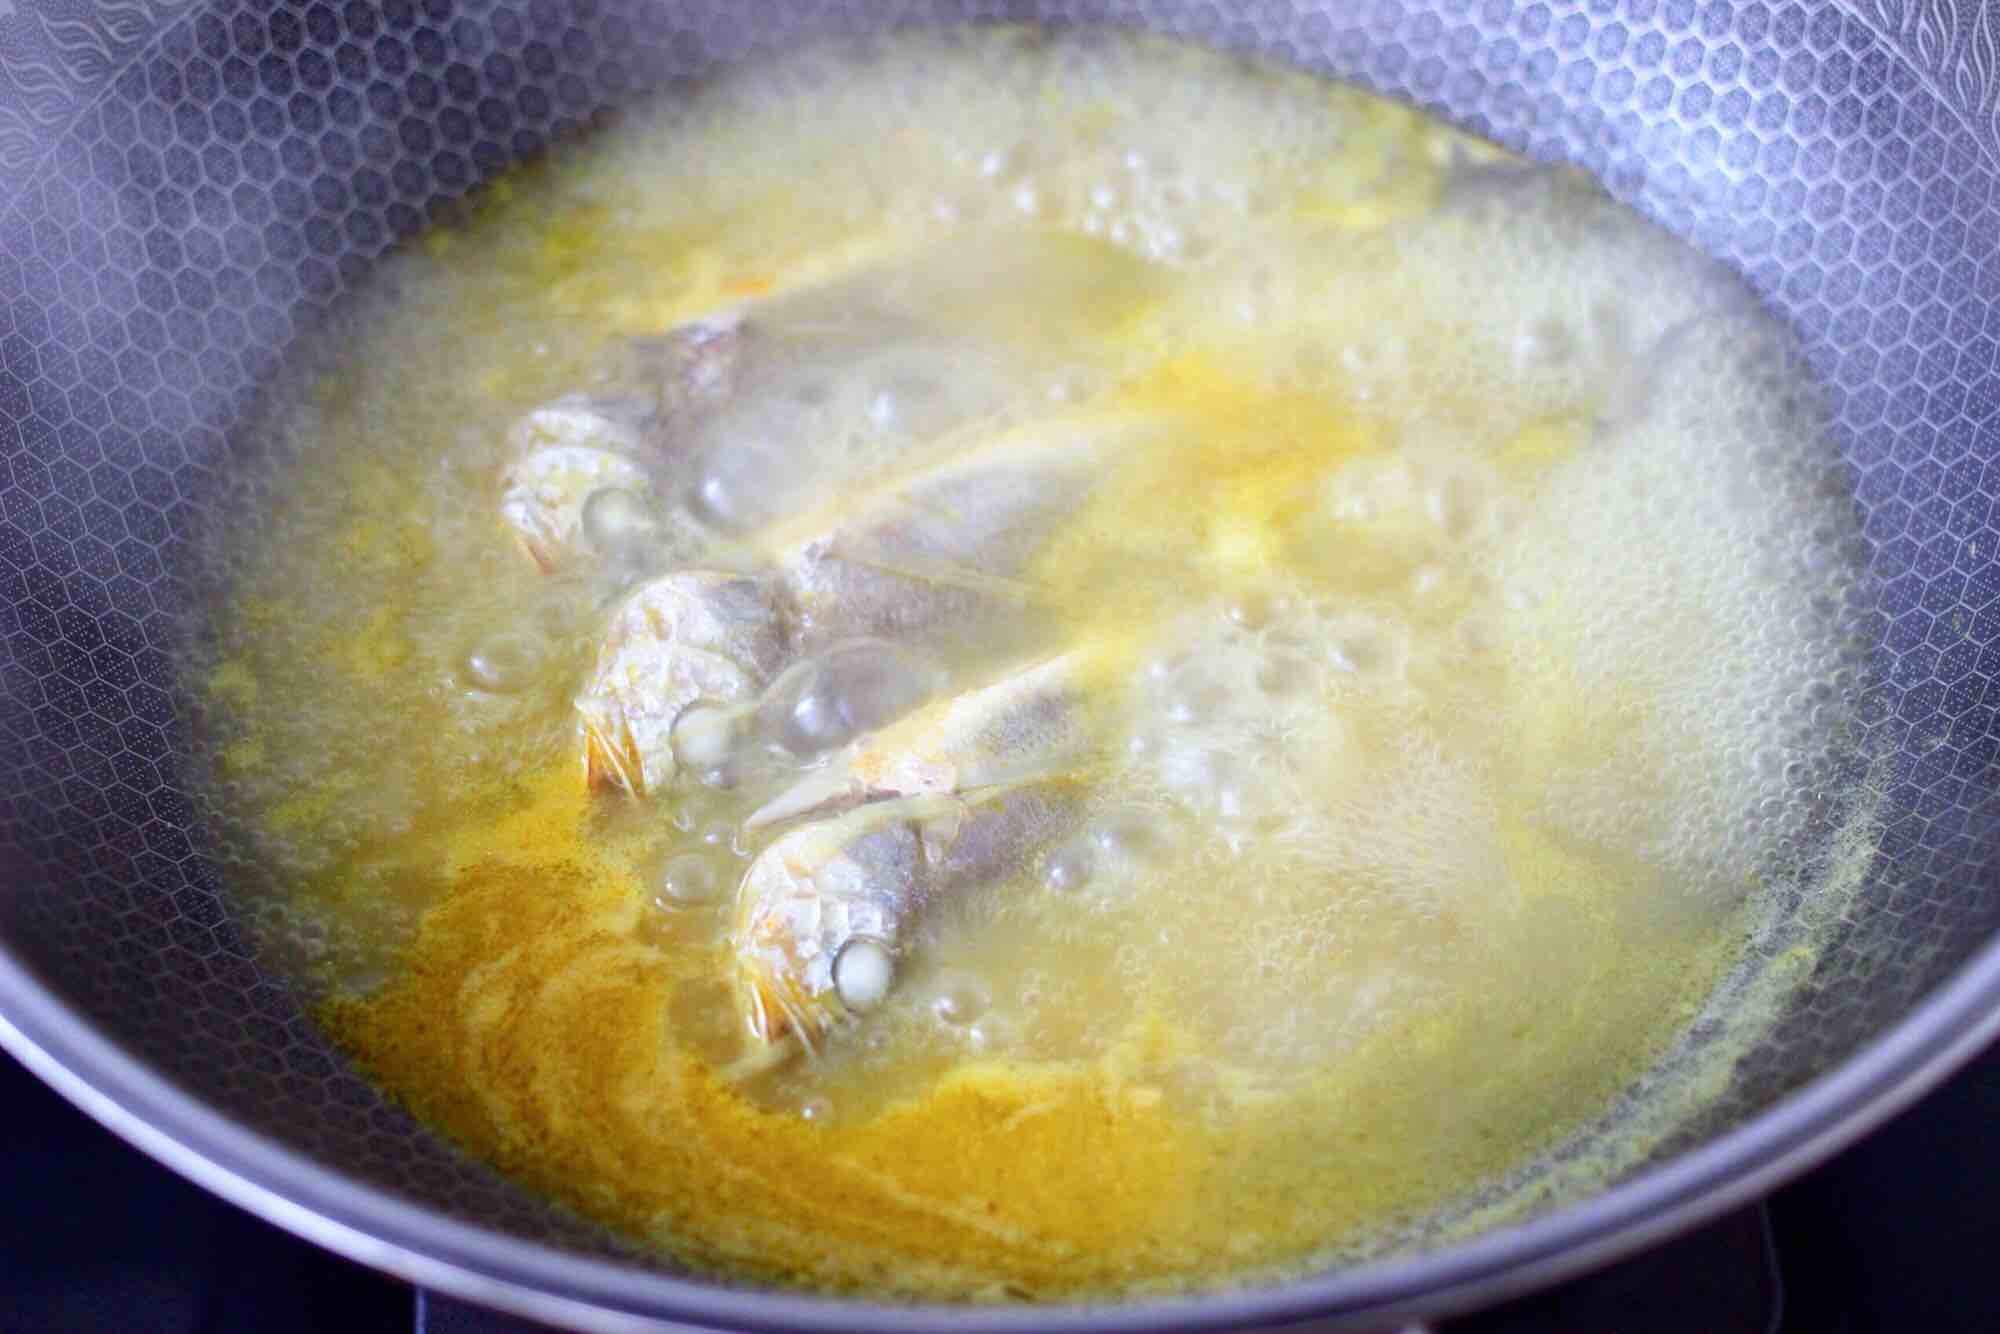 Yellow Croaker and Sweet Potato Noodles in Sour Soup recipe